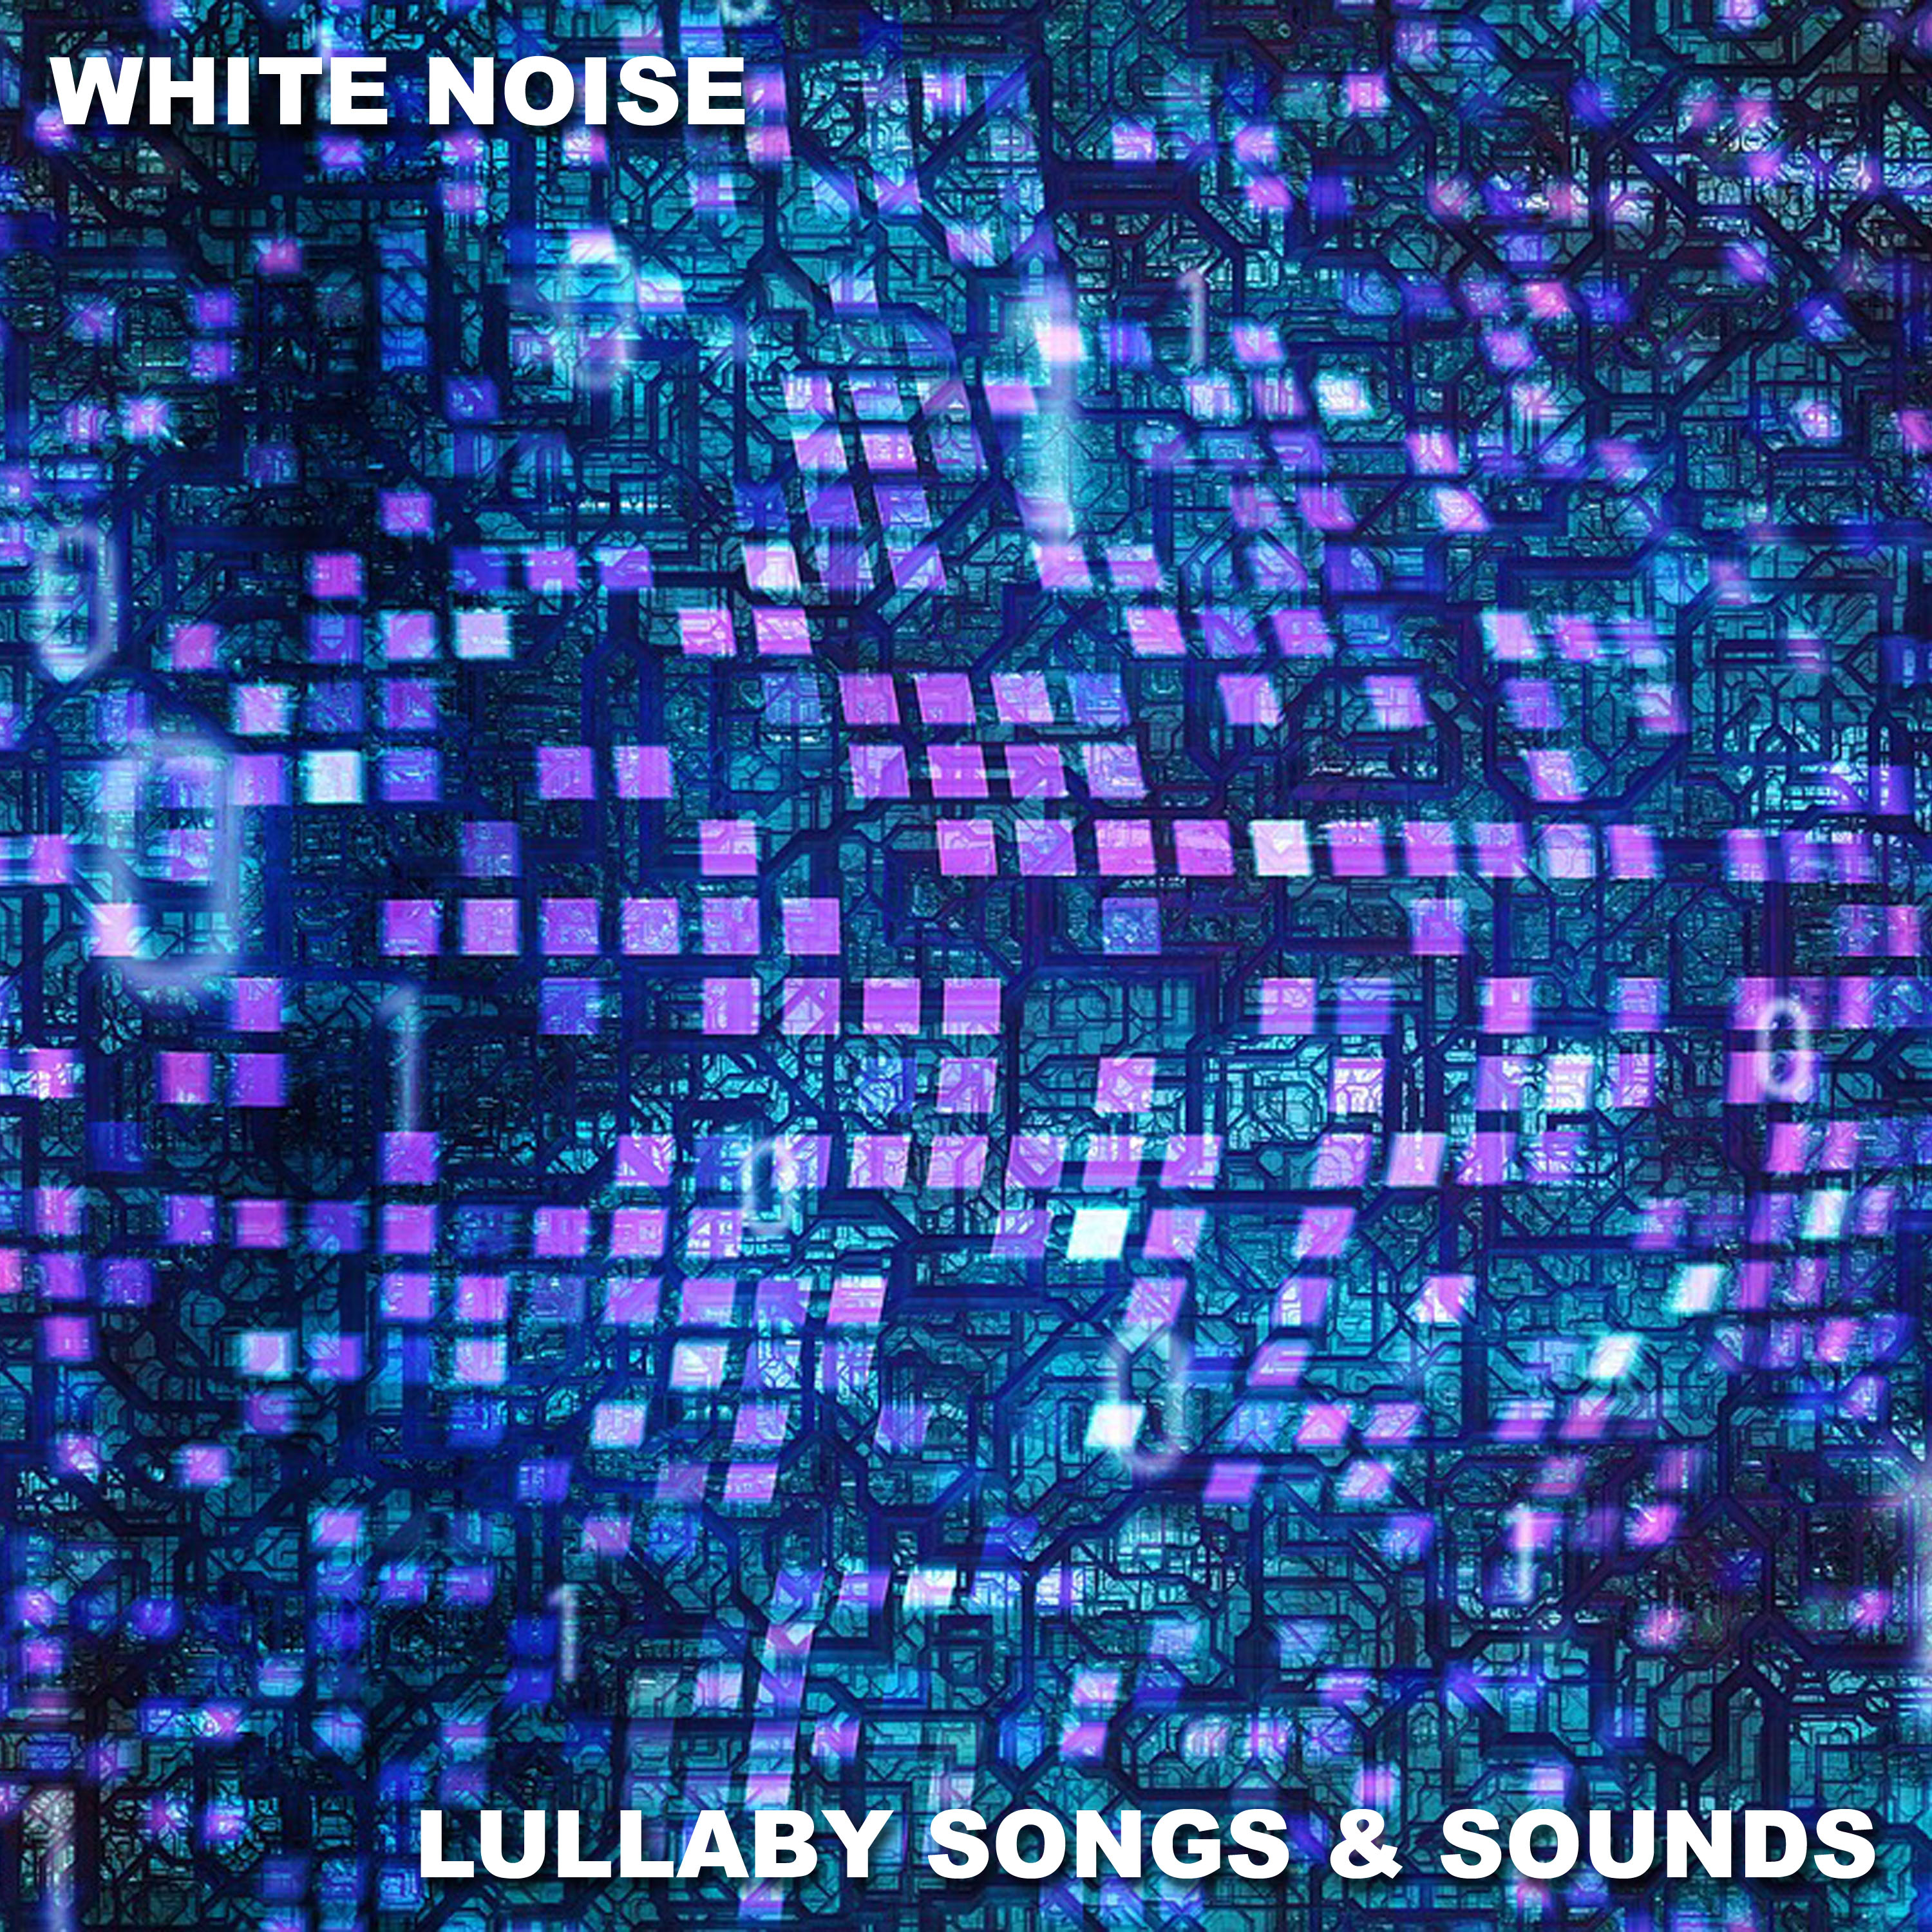 13 White Noise Lullaby Songs & Sounds